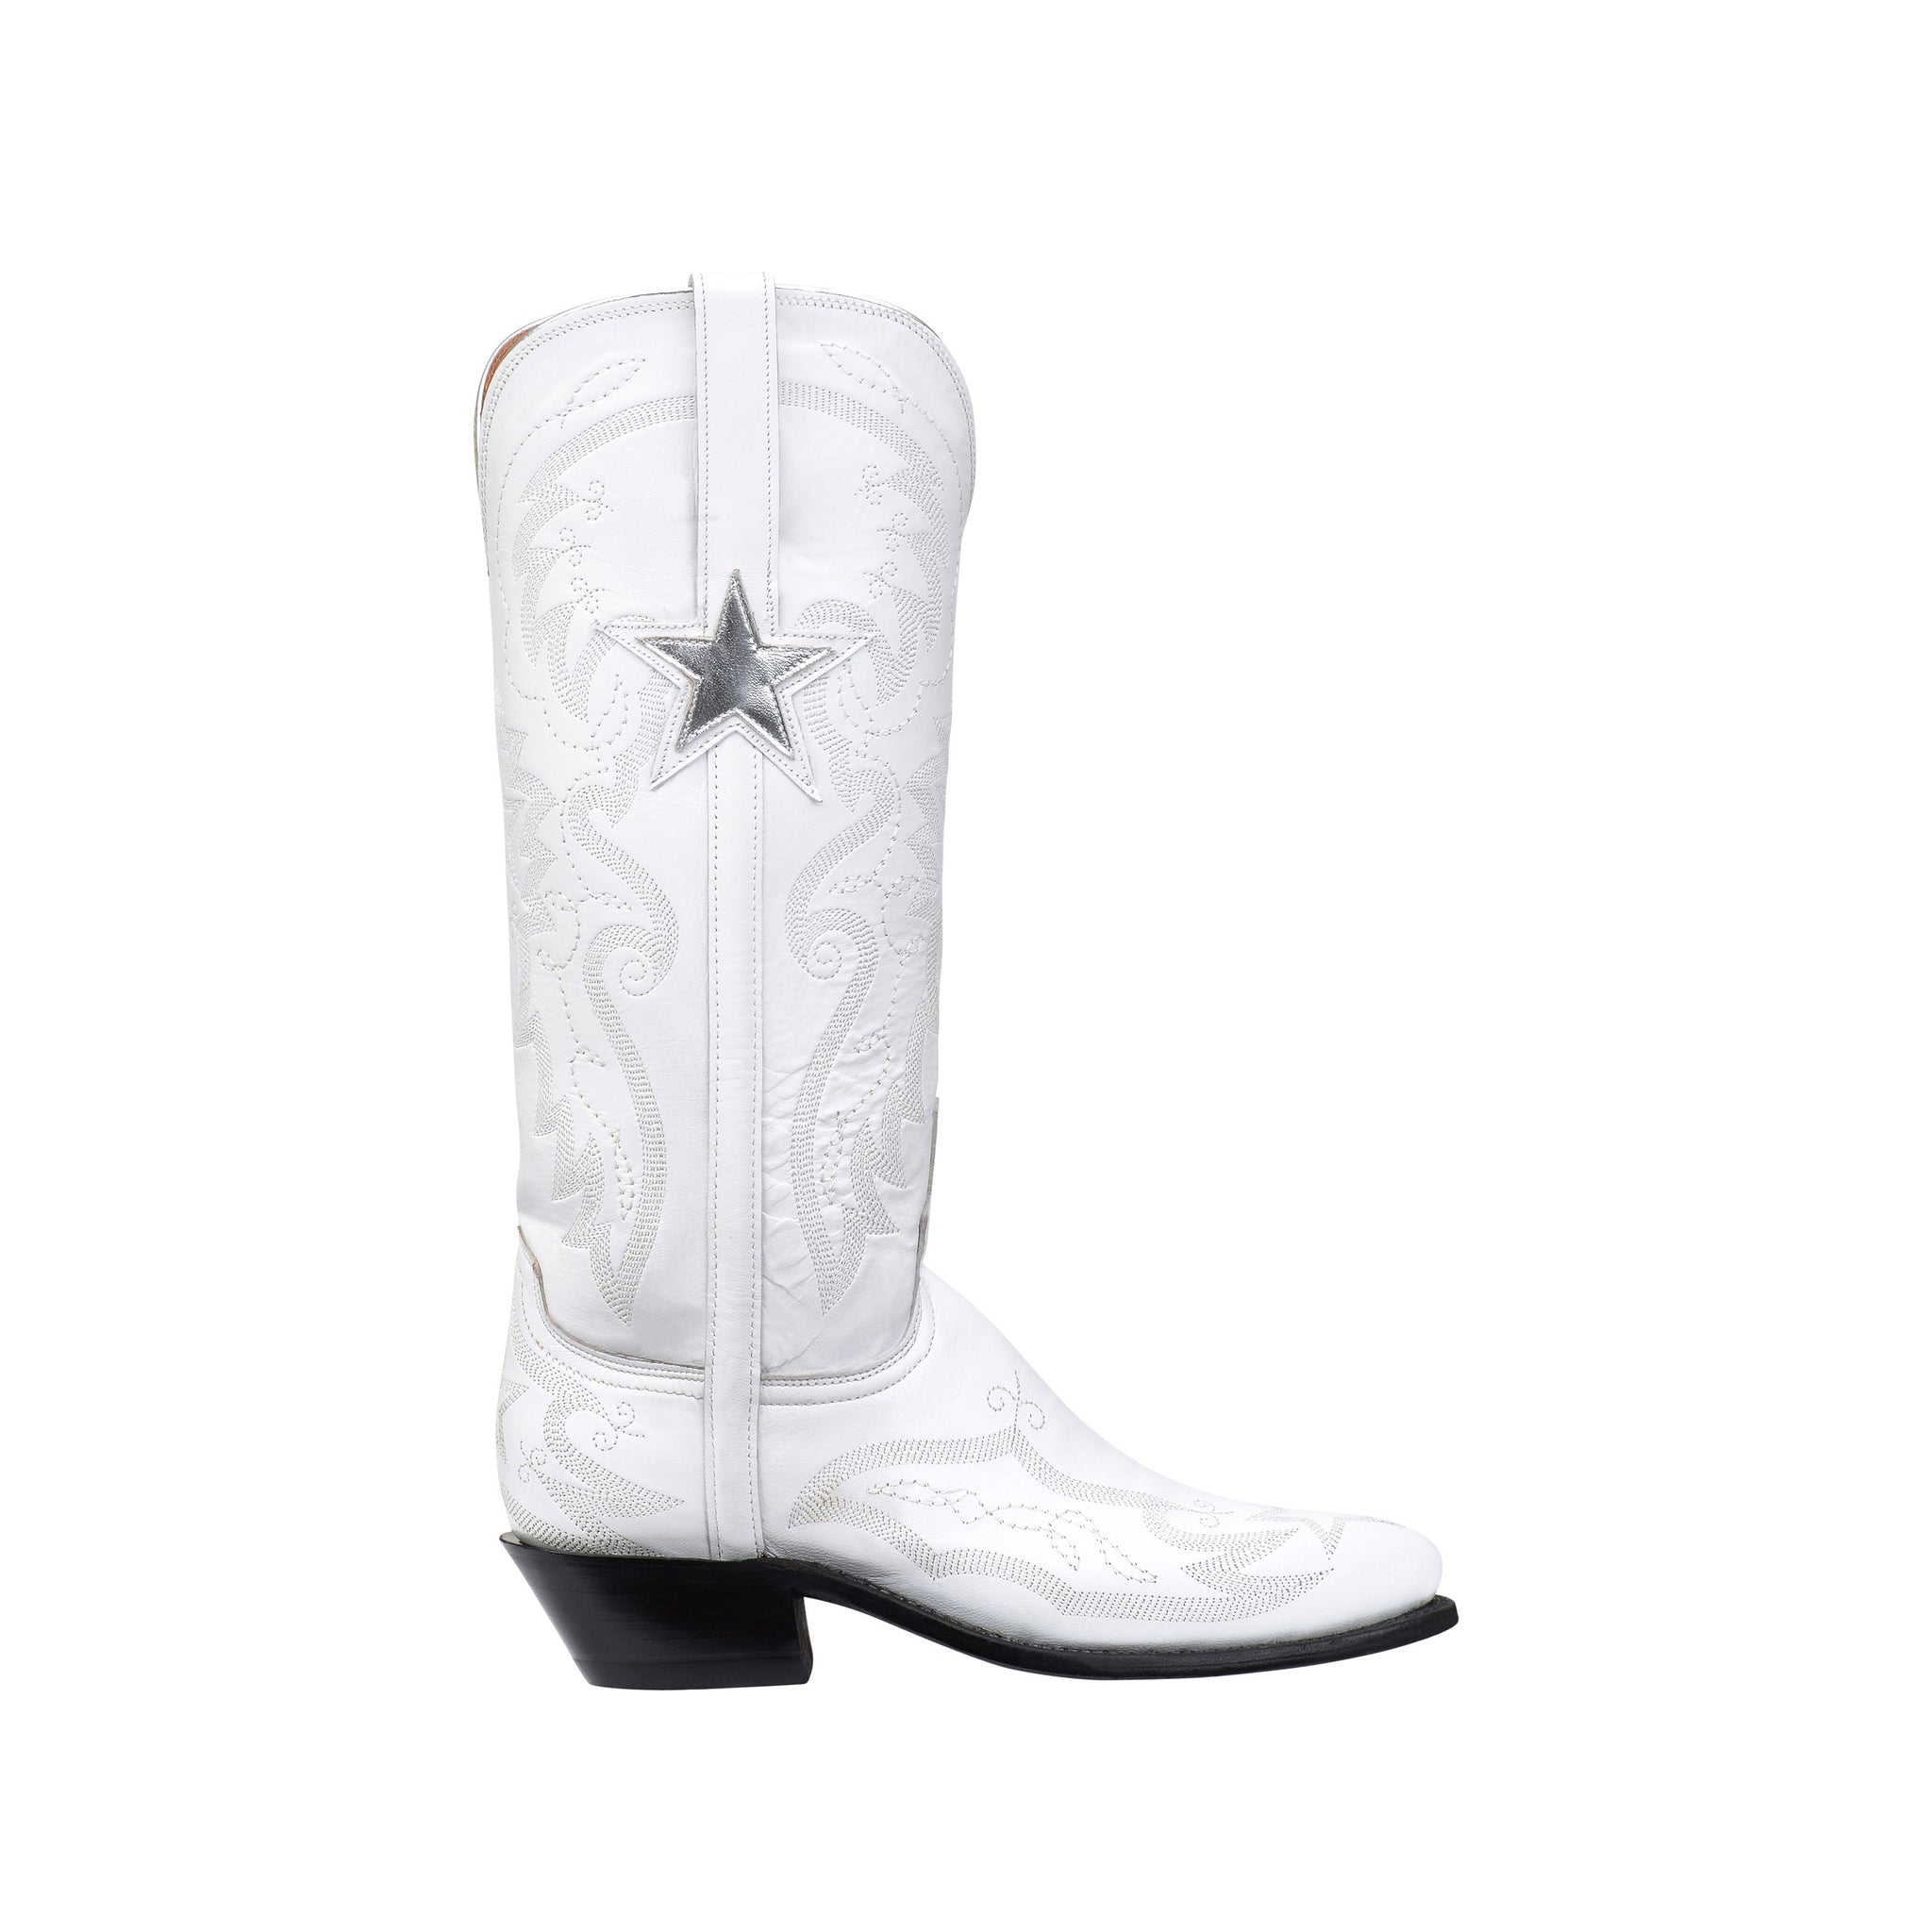 Lucchese Womens Cowboy Boots White Goat Leather